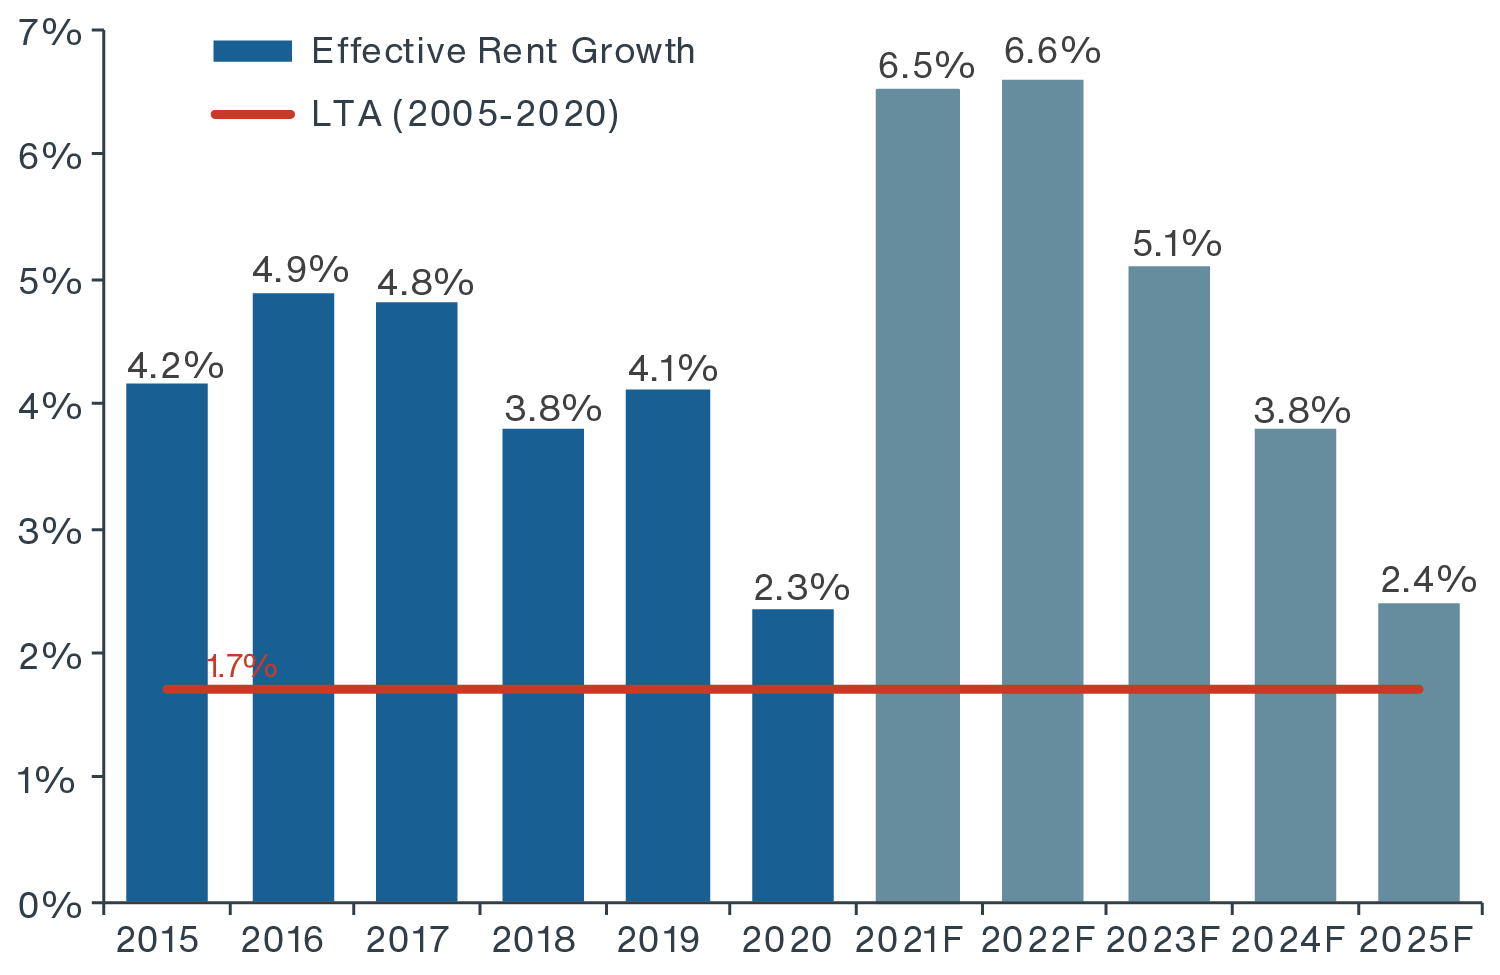 Industrial effective rent growth - history & forecast